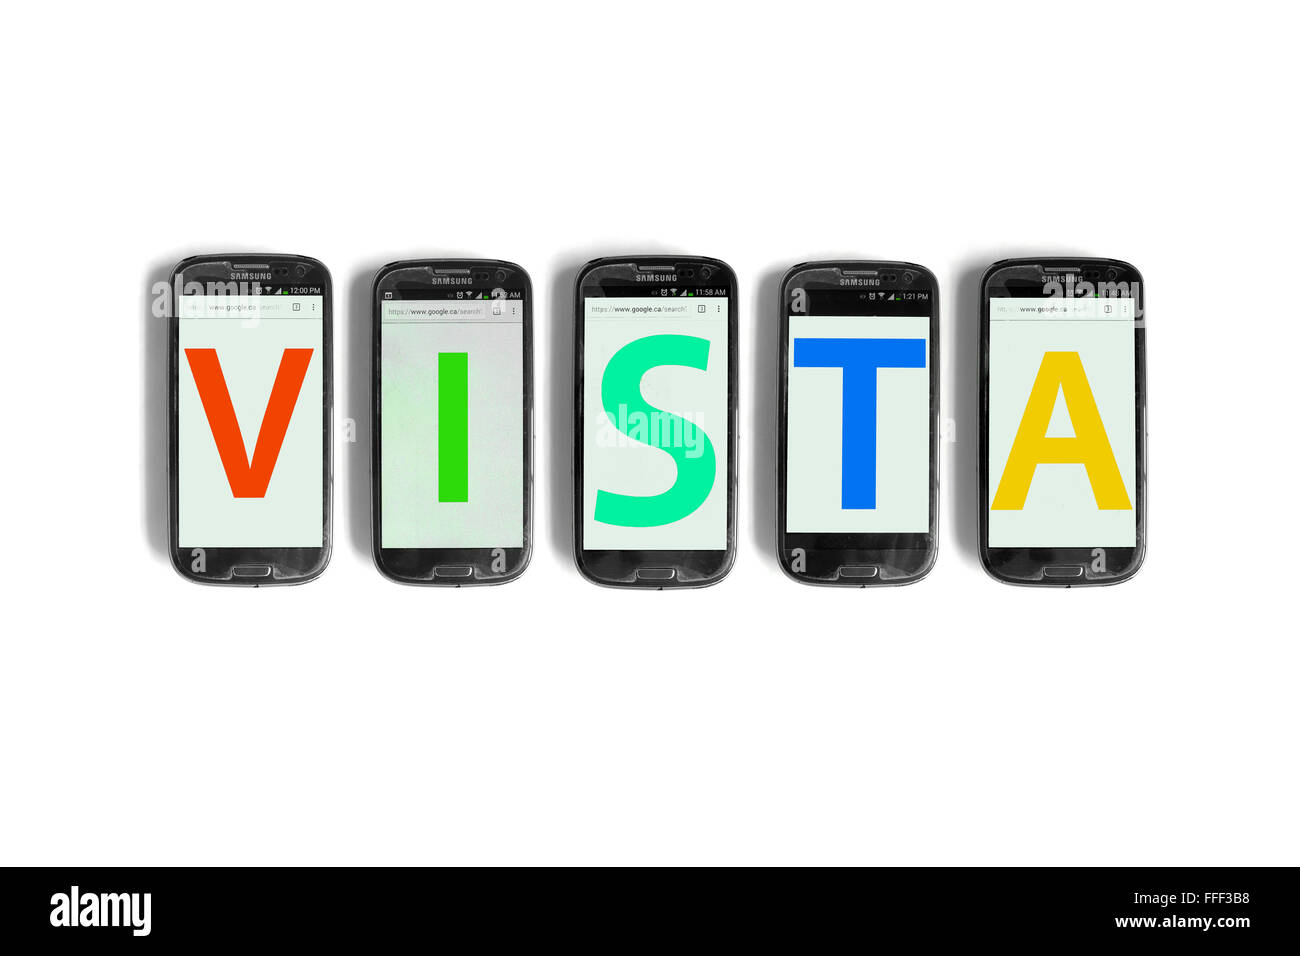 Vista written on the screen of smartphones photographed against a white background. Stock Photo